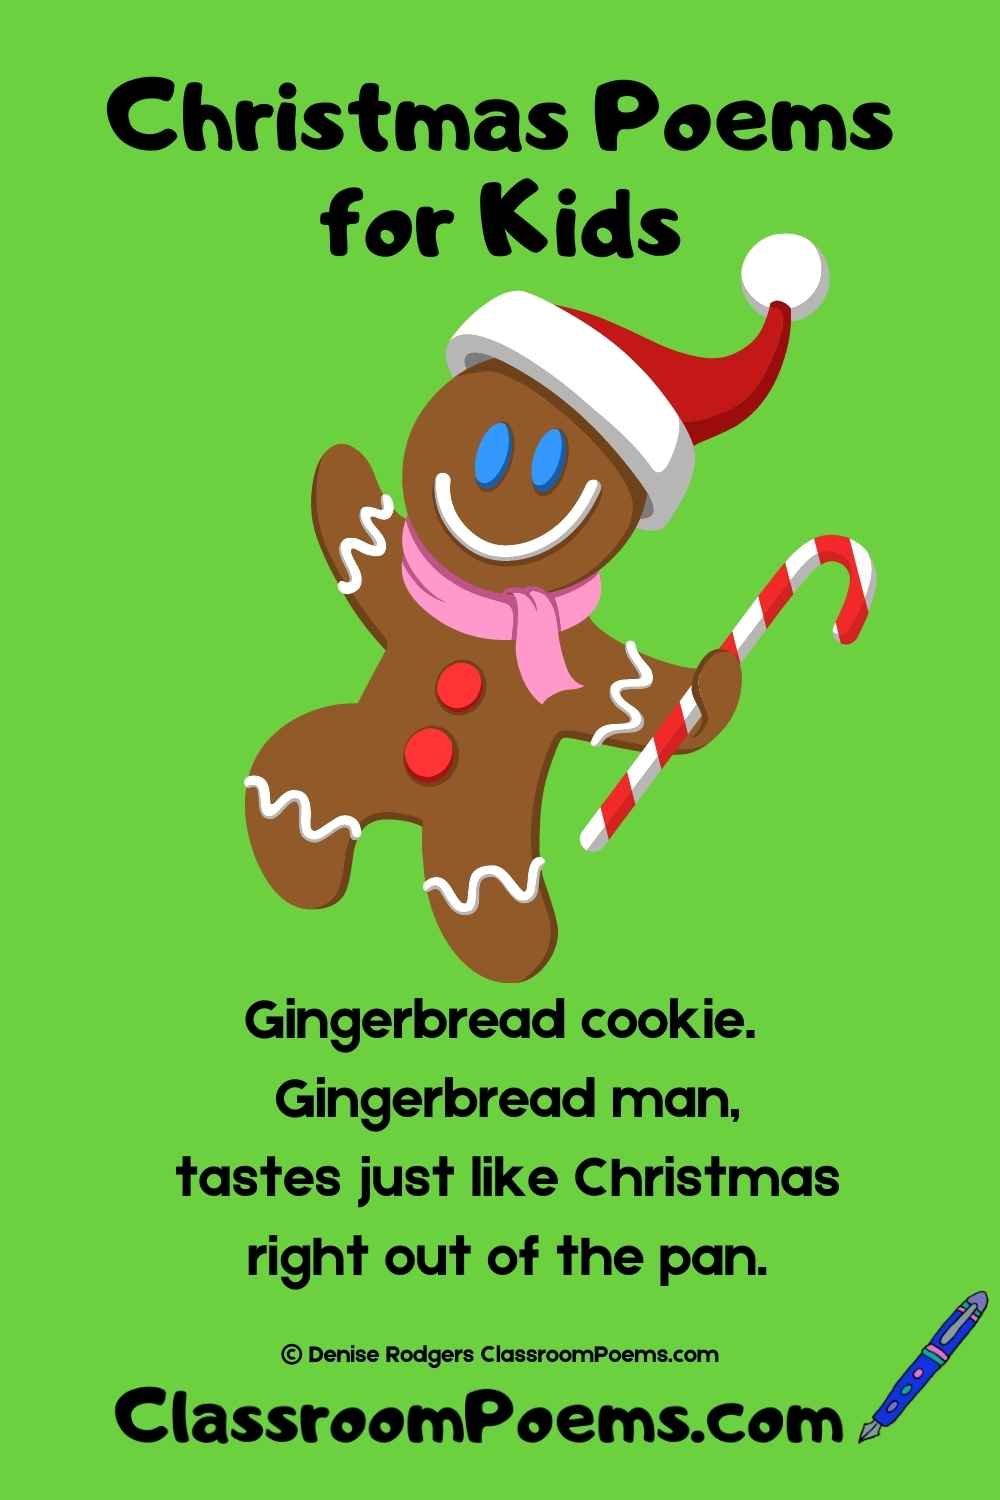 Gingerbread man Christmas poem for kids by Denise Rodgers on ClassroomPoems.com.